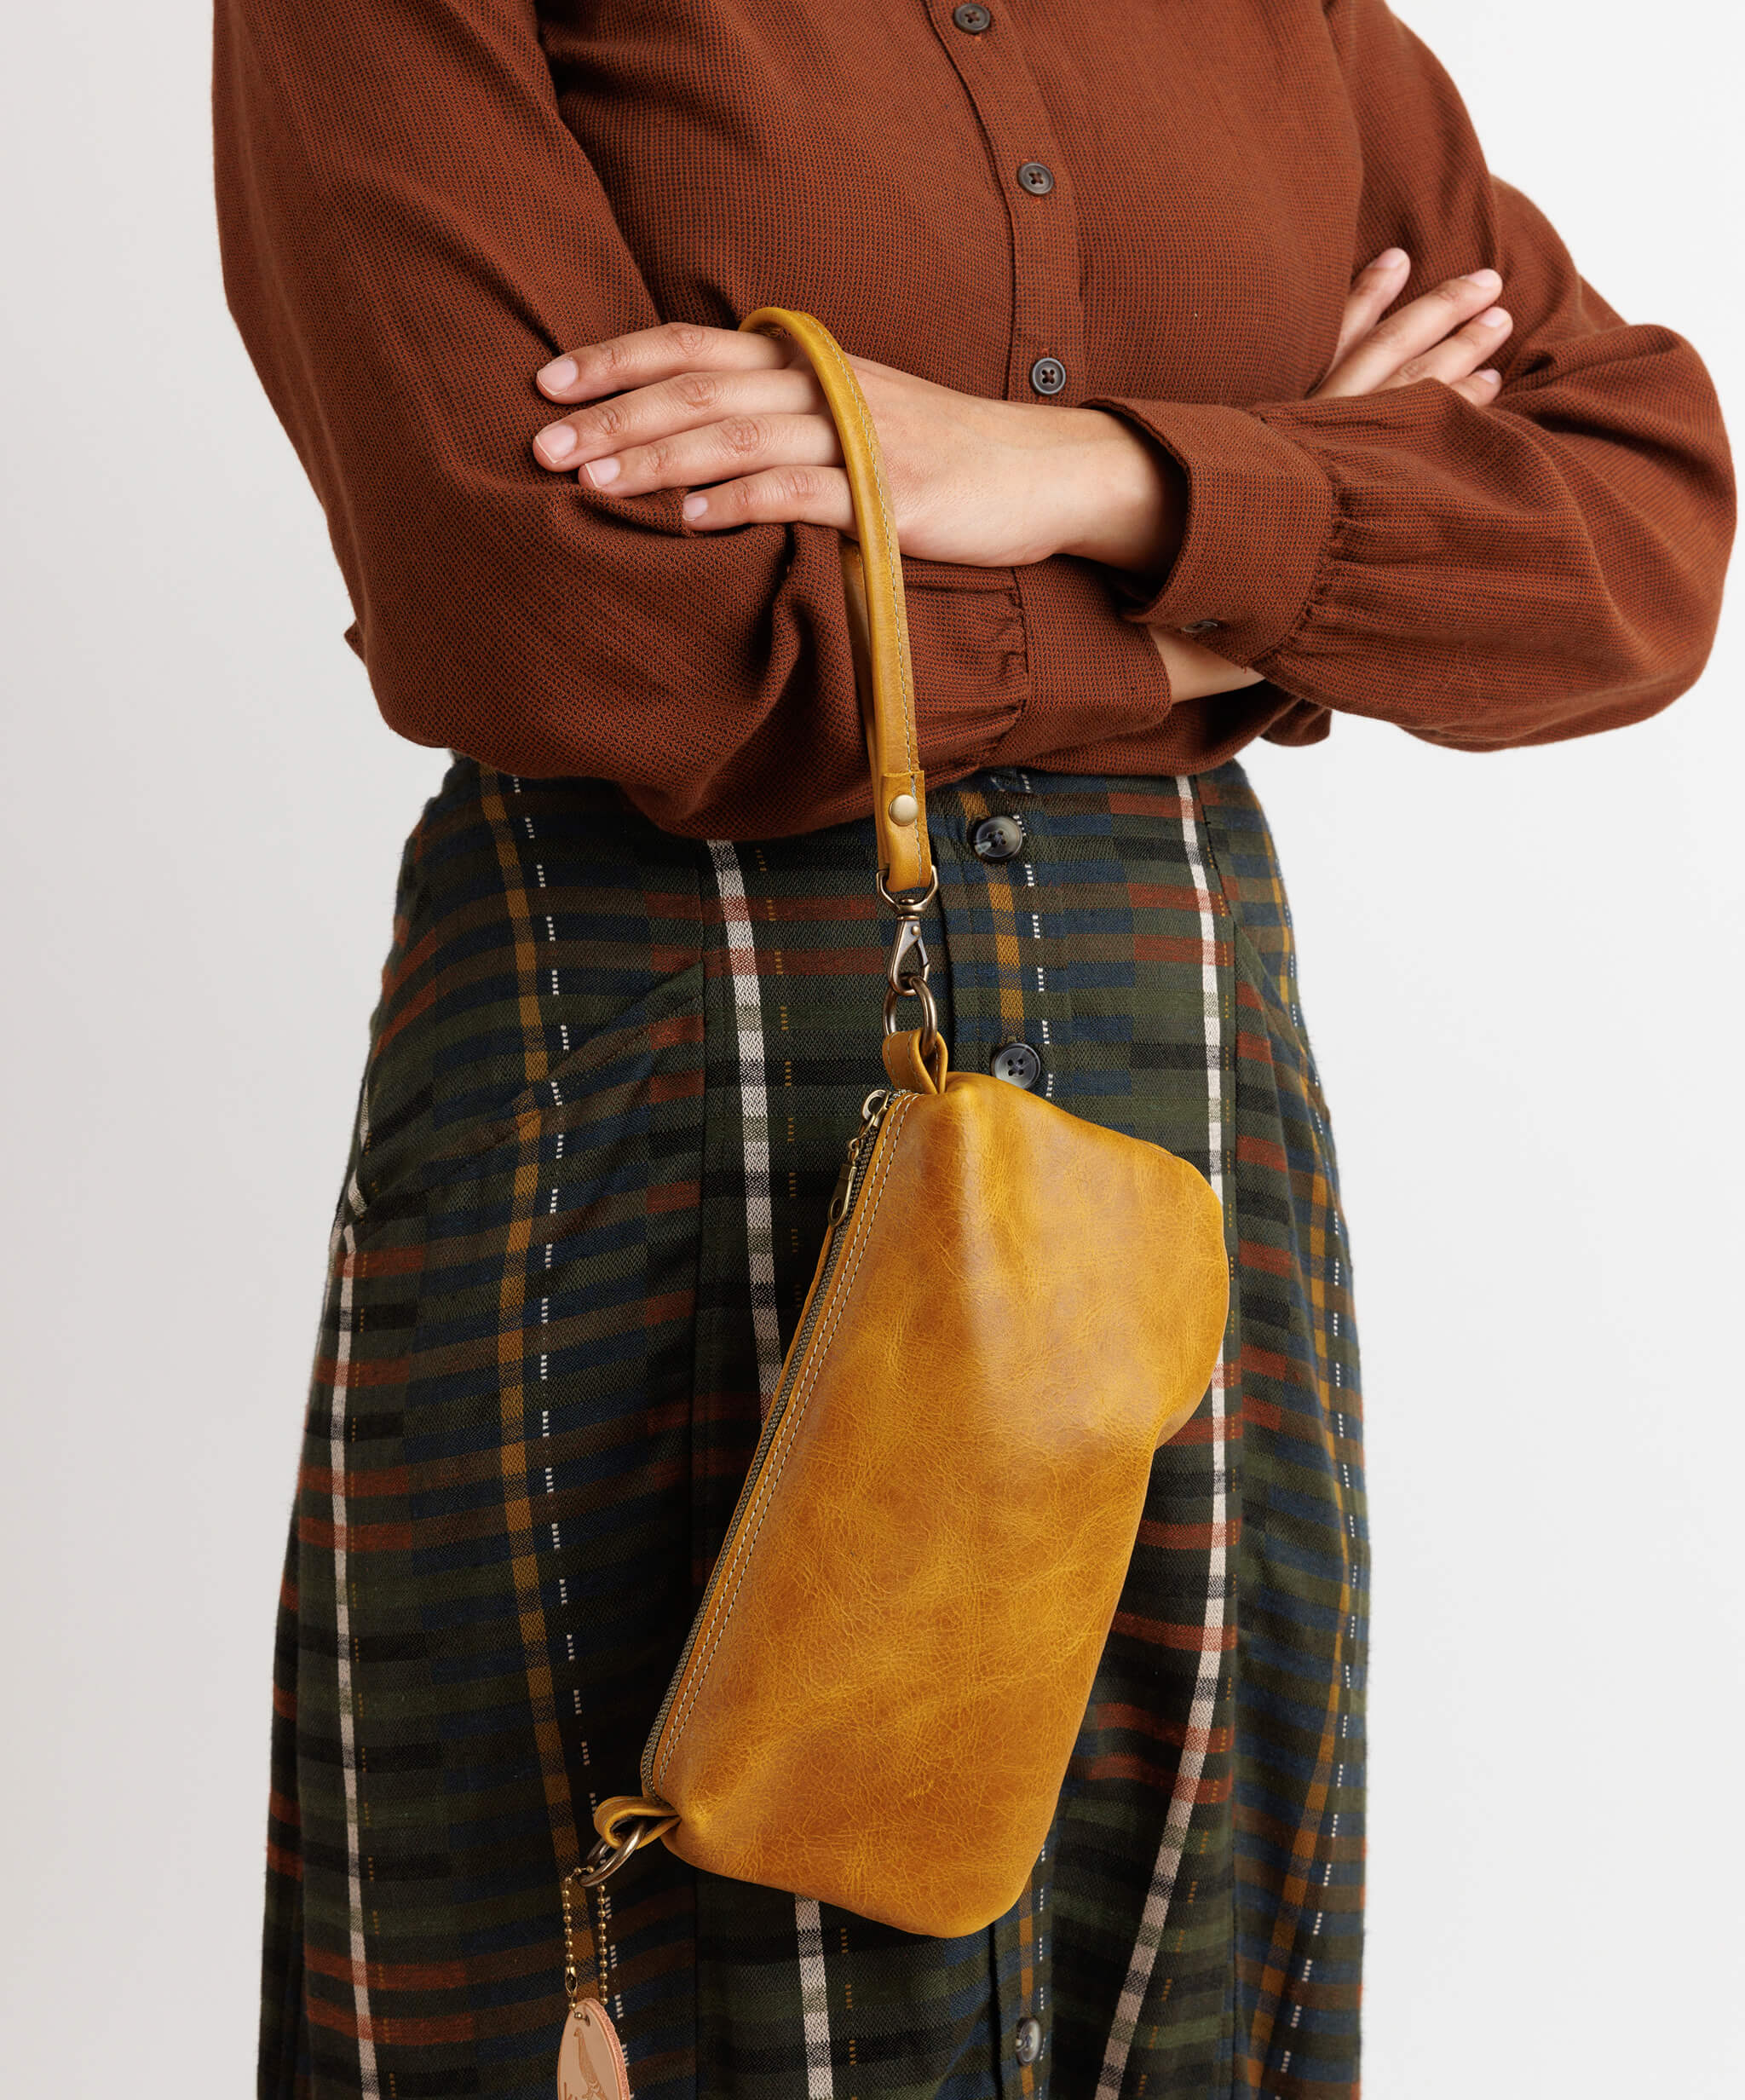 Handcrafted Clogs, Bags & Leather Goods - Made in Maine - Kurier